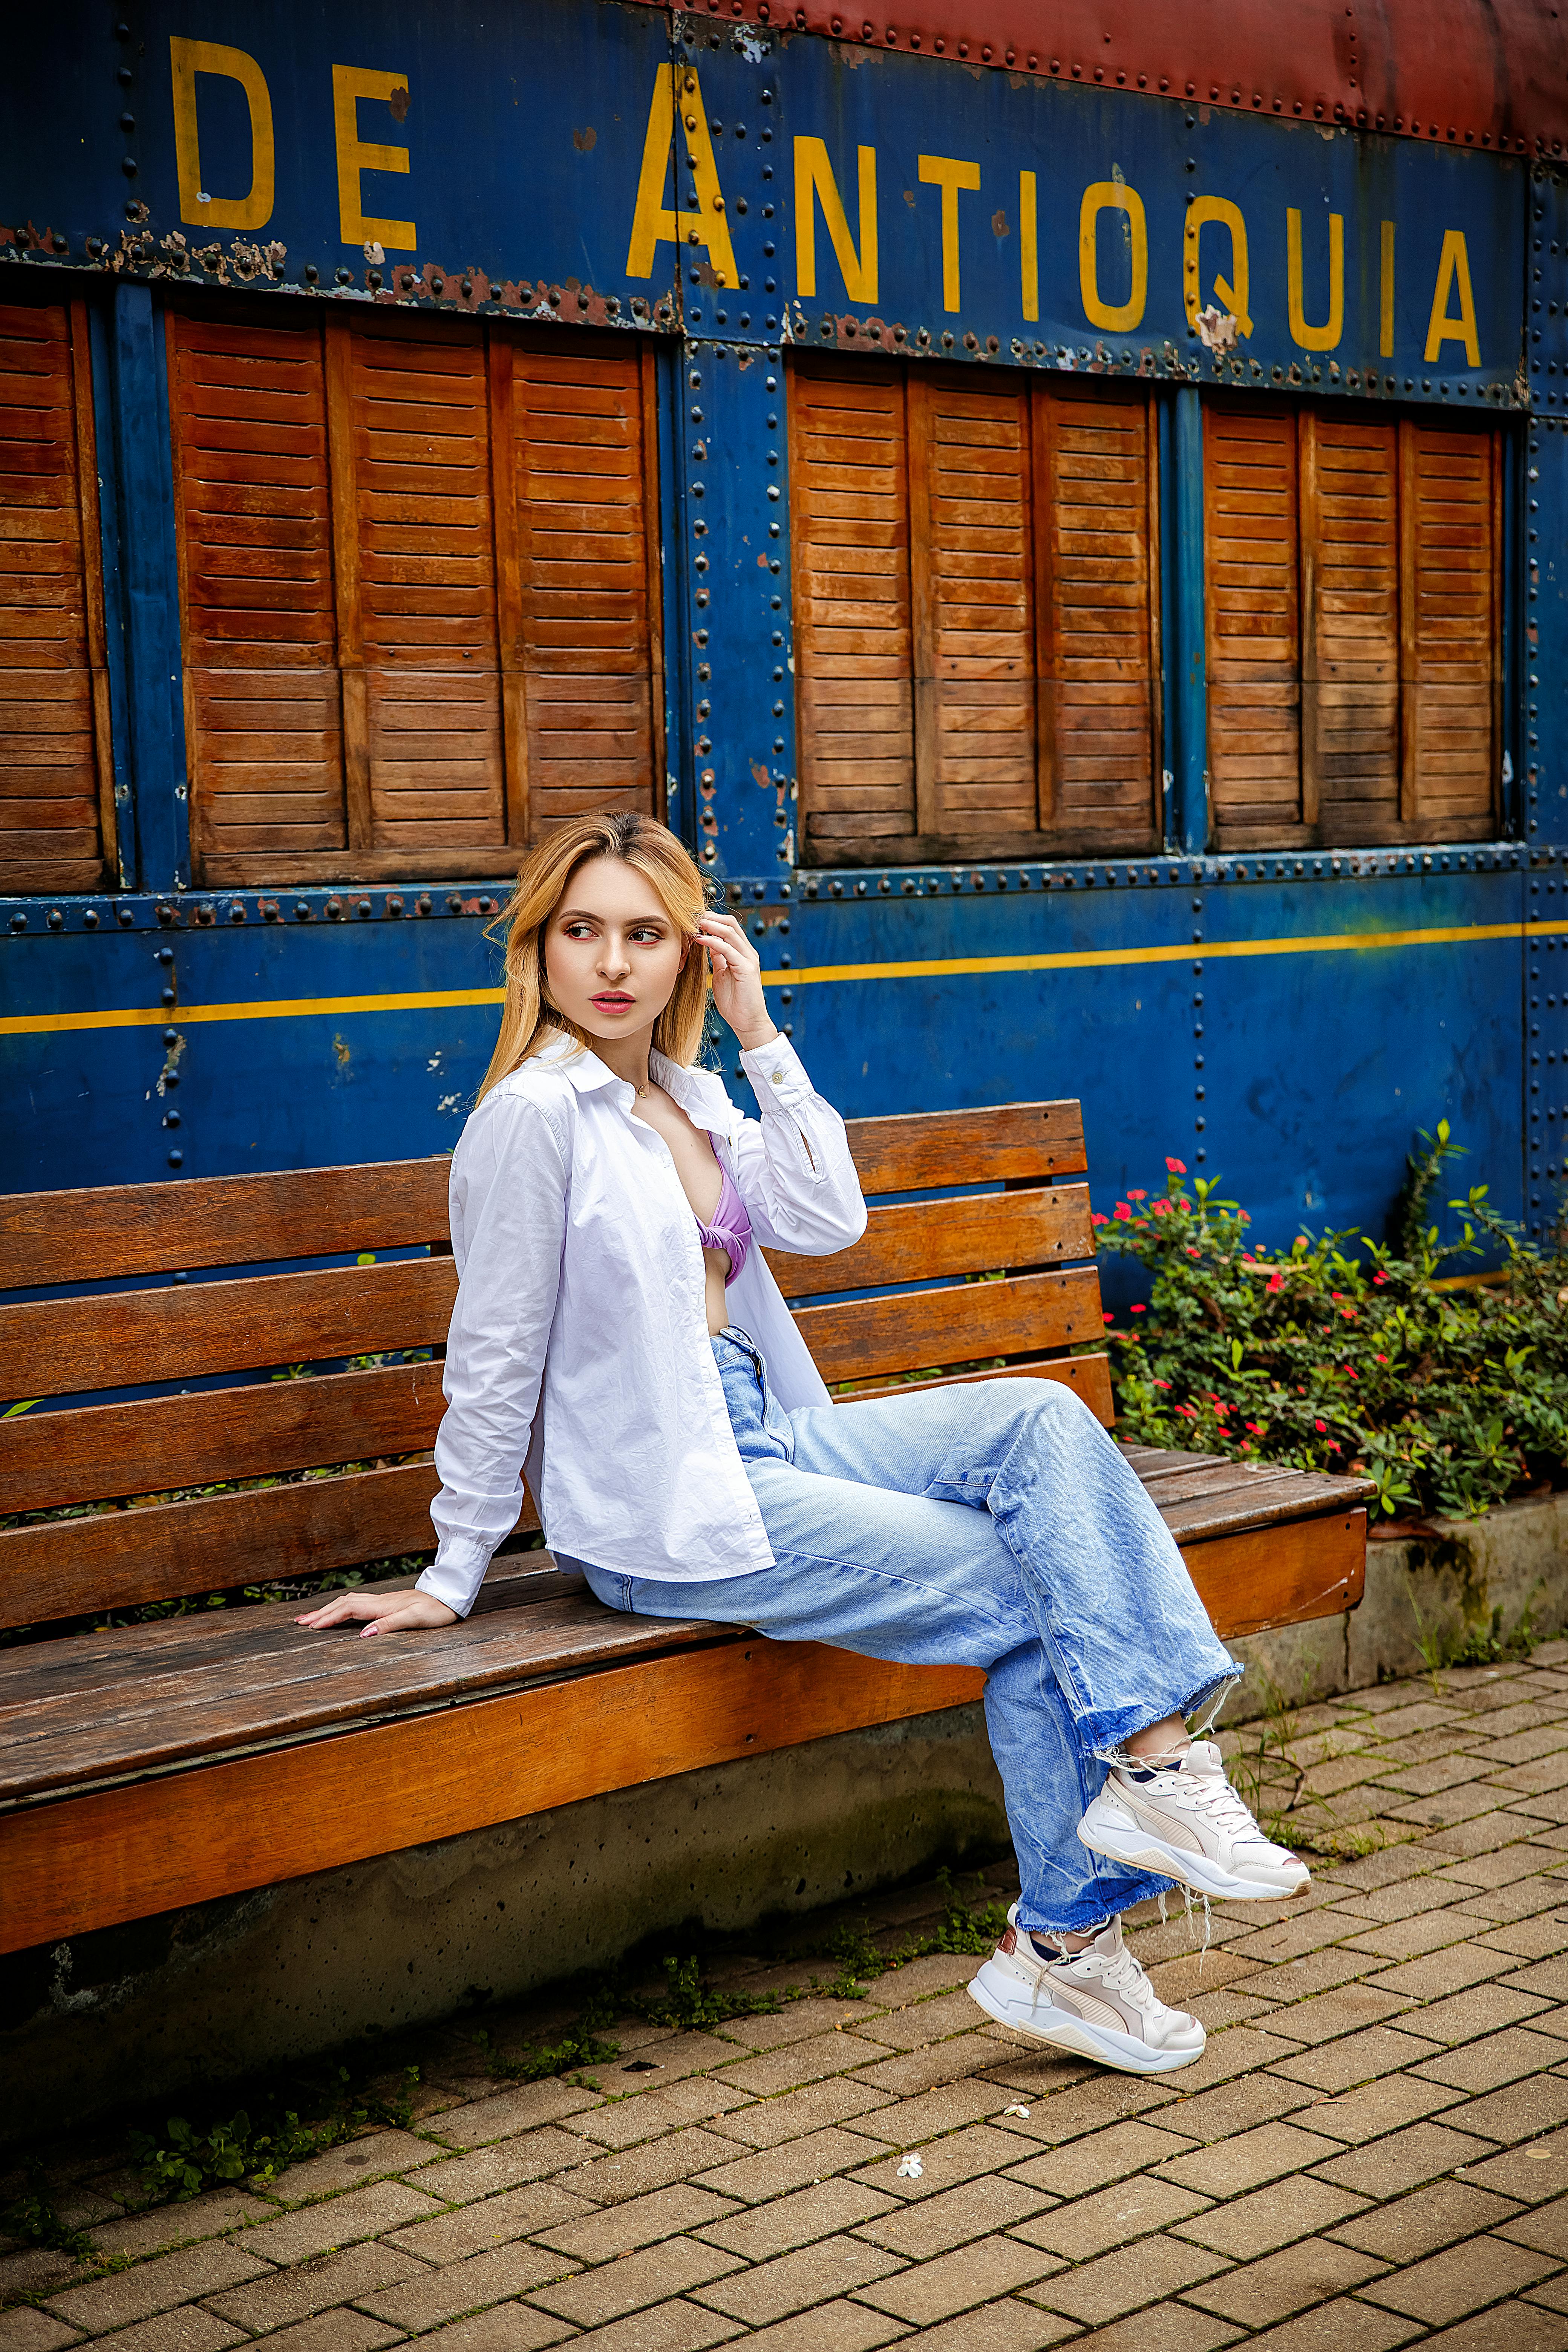 Woman Sitting and Posing on Bench · Free Stock Photo